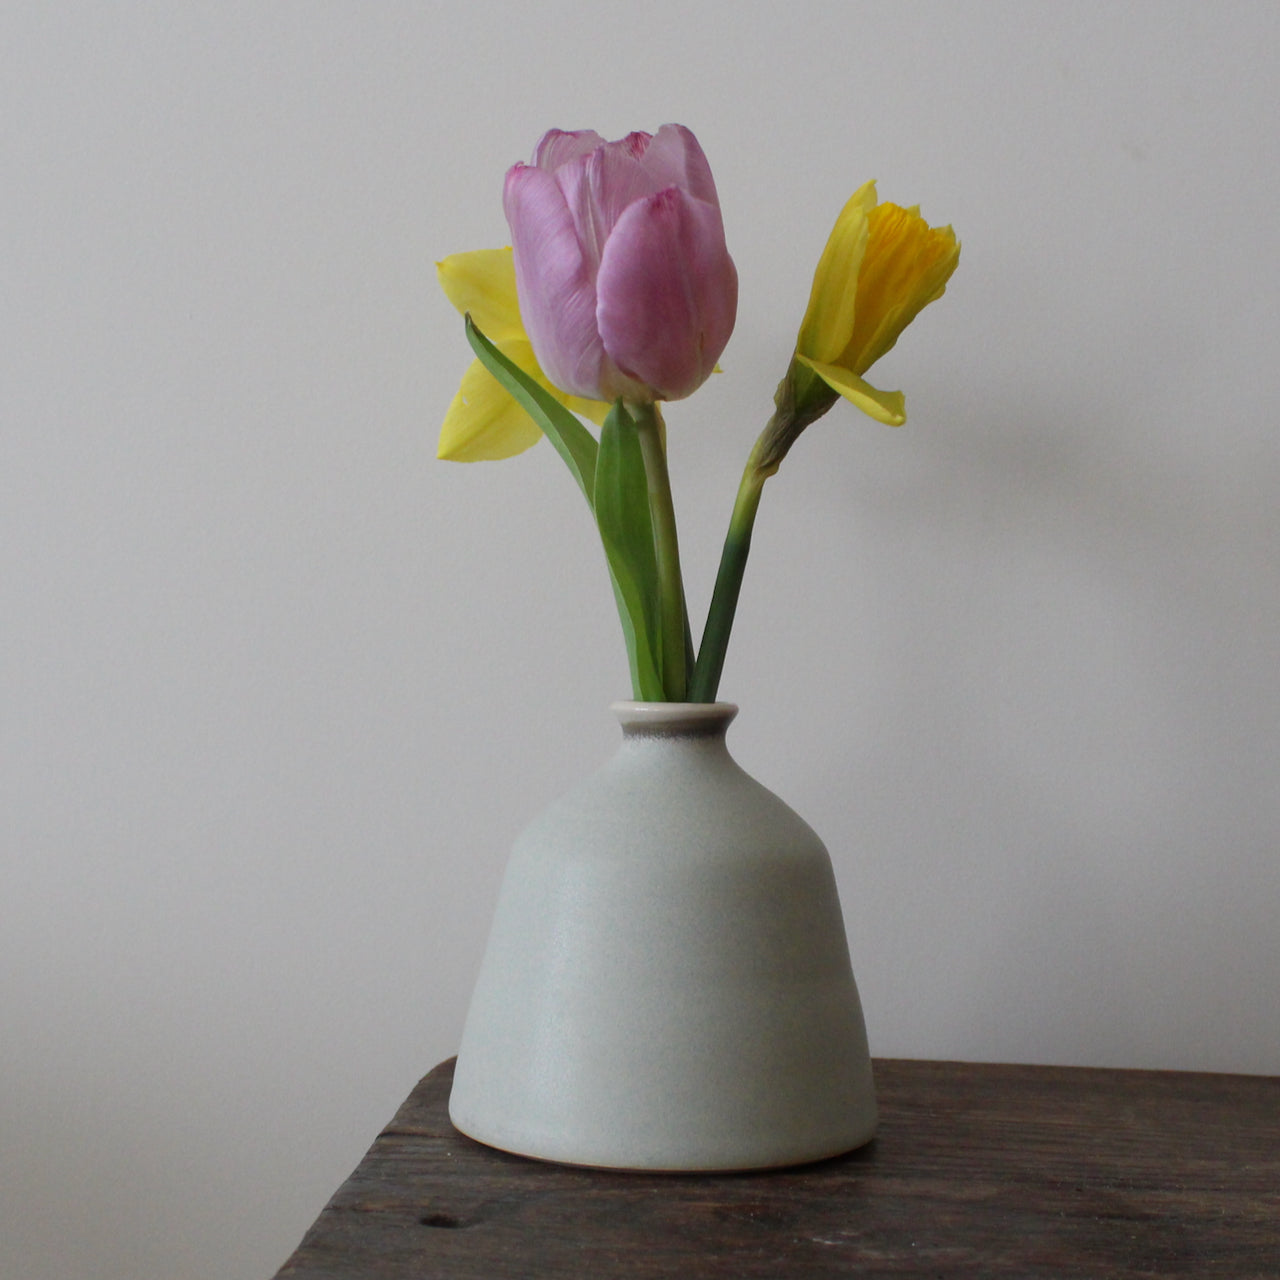 EOT ceramics pale grey bud vase with a pink tulip and two daffodils in it 